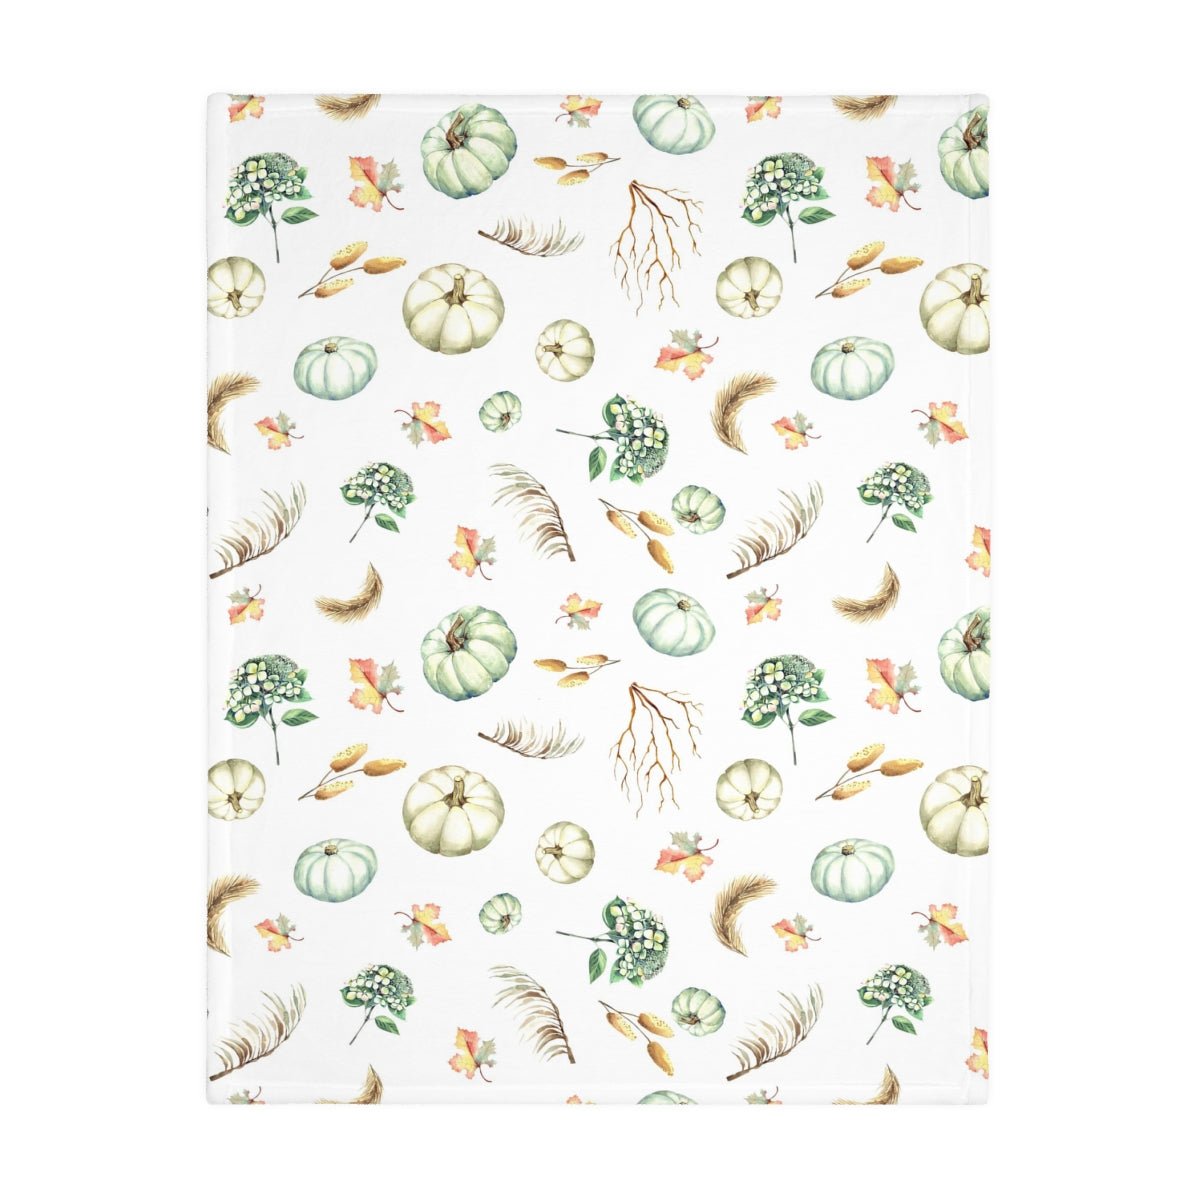 Fall Pumpkins and Leaves Velveteen Minky Blanket 40" × 30" (Two-sided print) - Puffin Lime